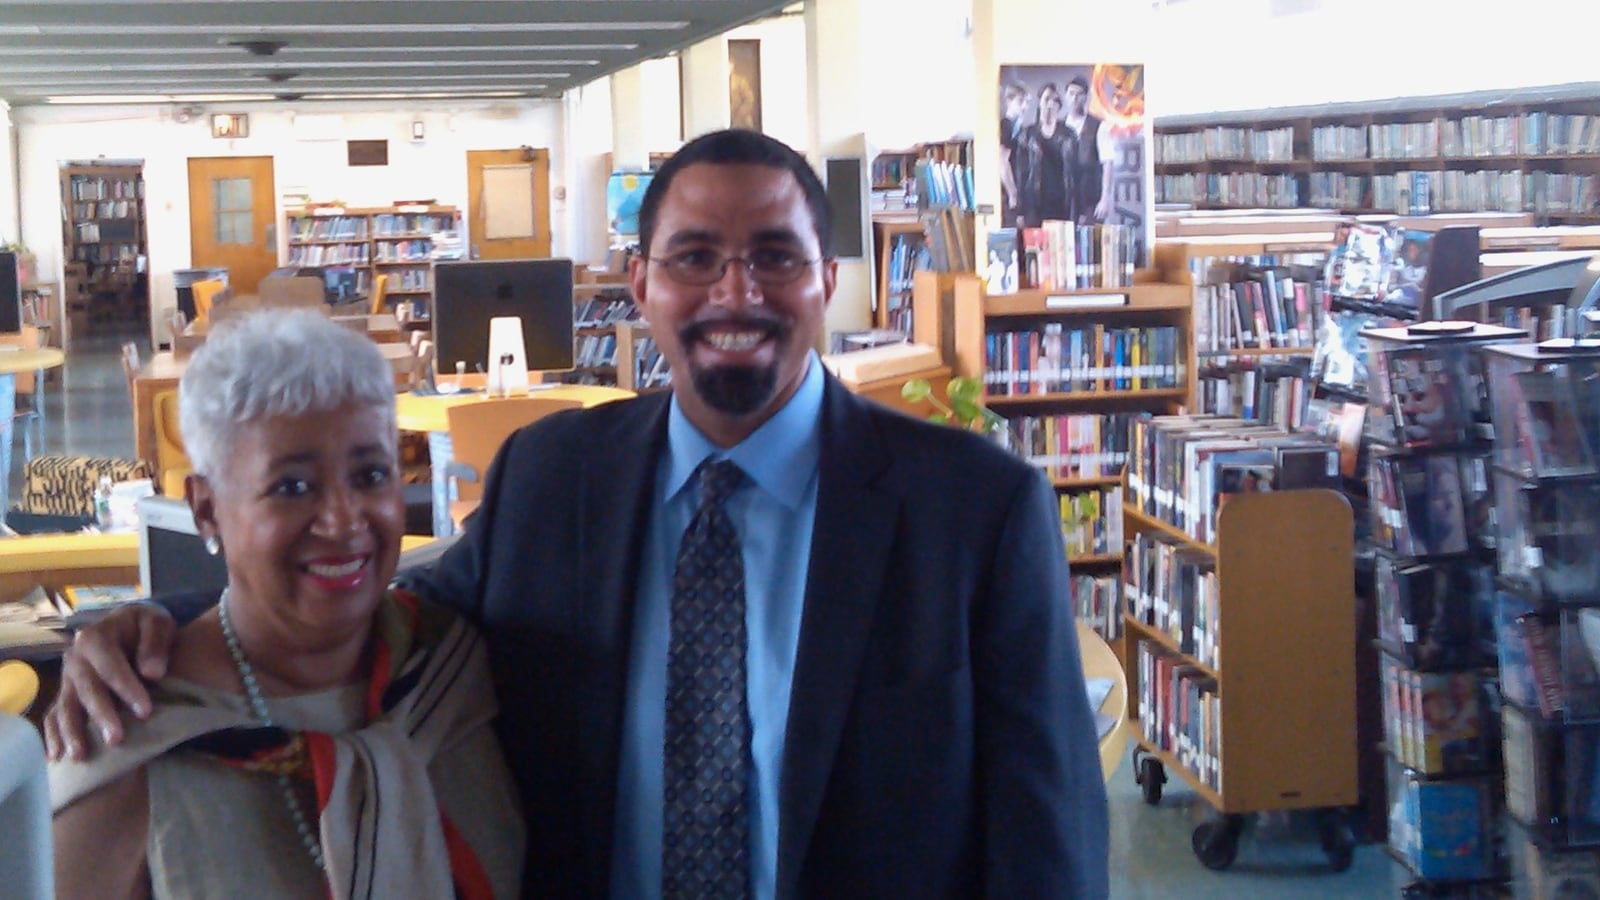 State Education Commissioner John King visits in 2013 with second cousin Stephanie Smith, a librarian at George Wingate Educational Complex since 1969.